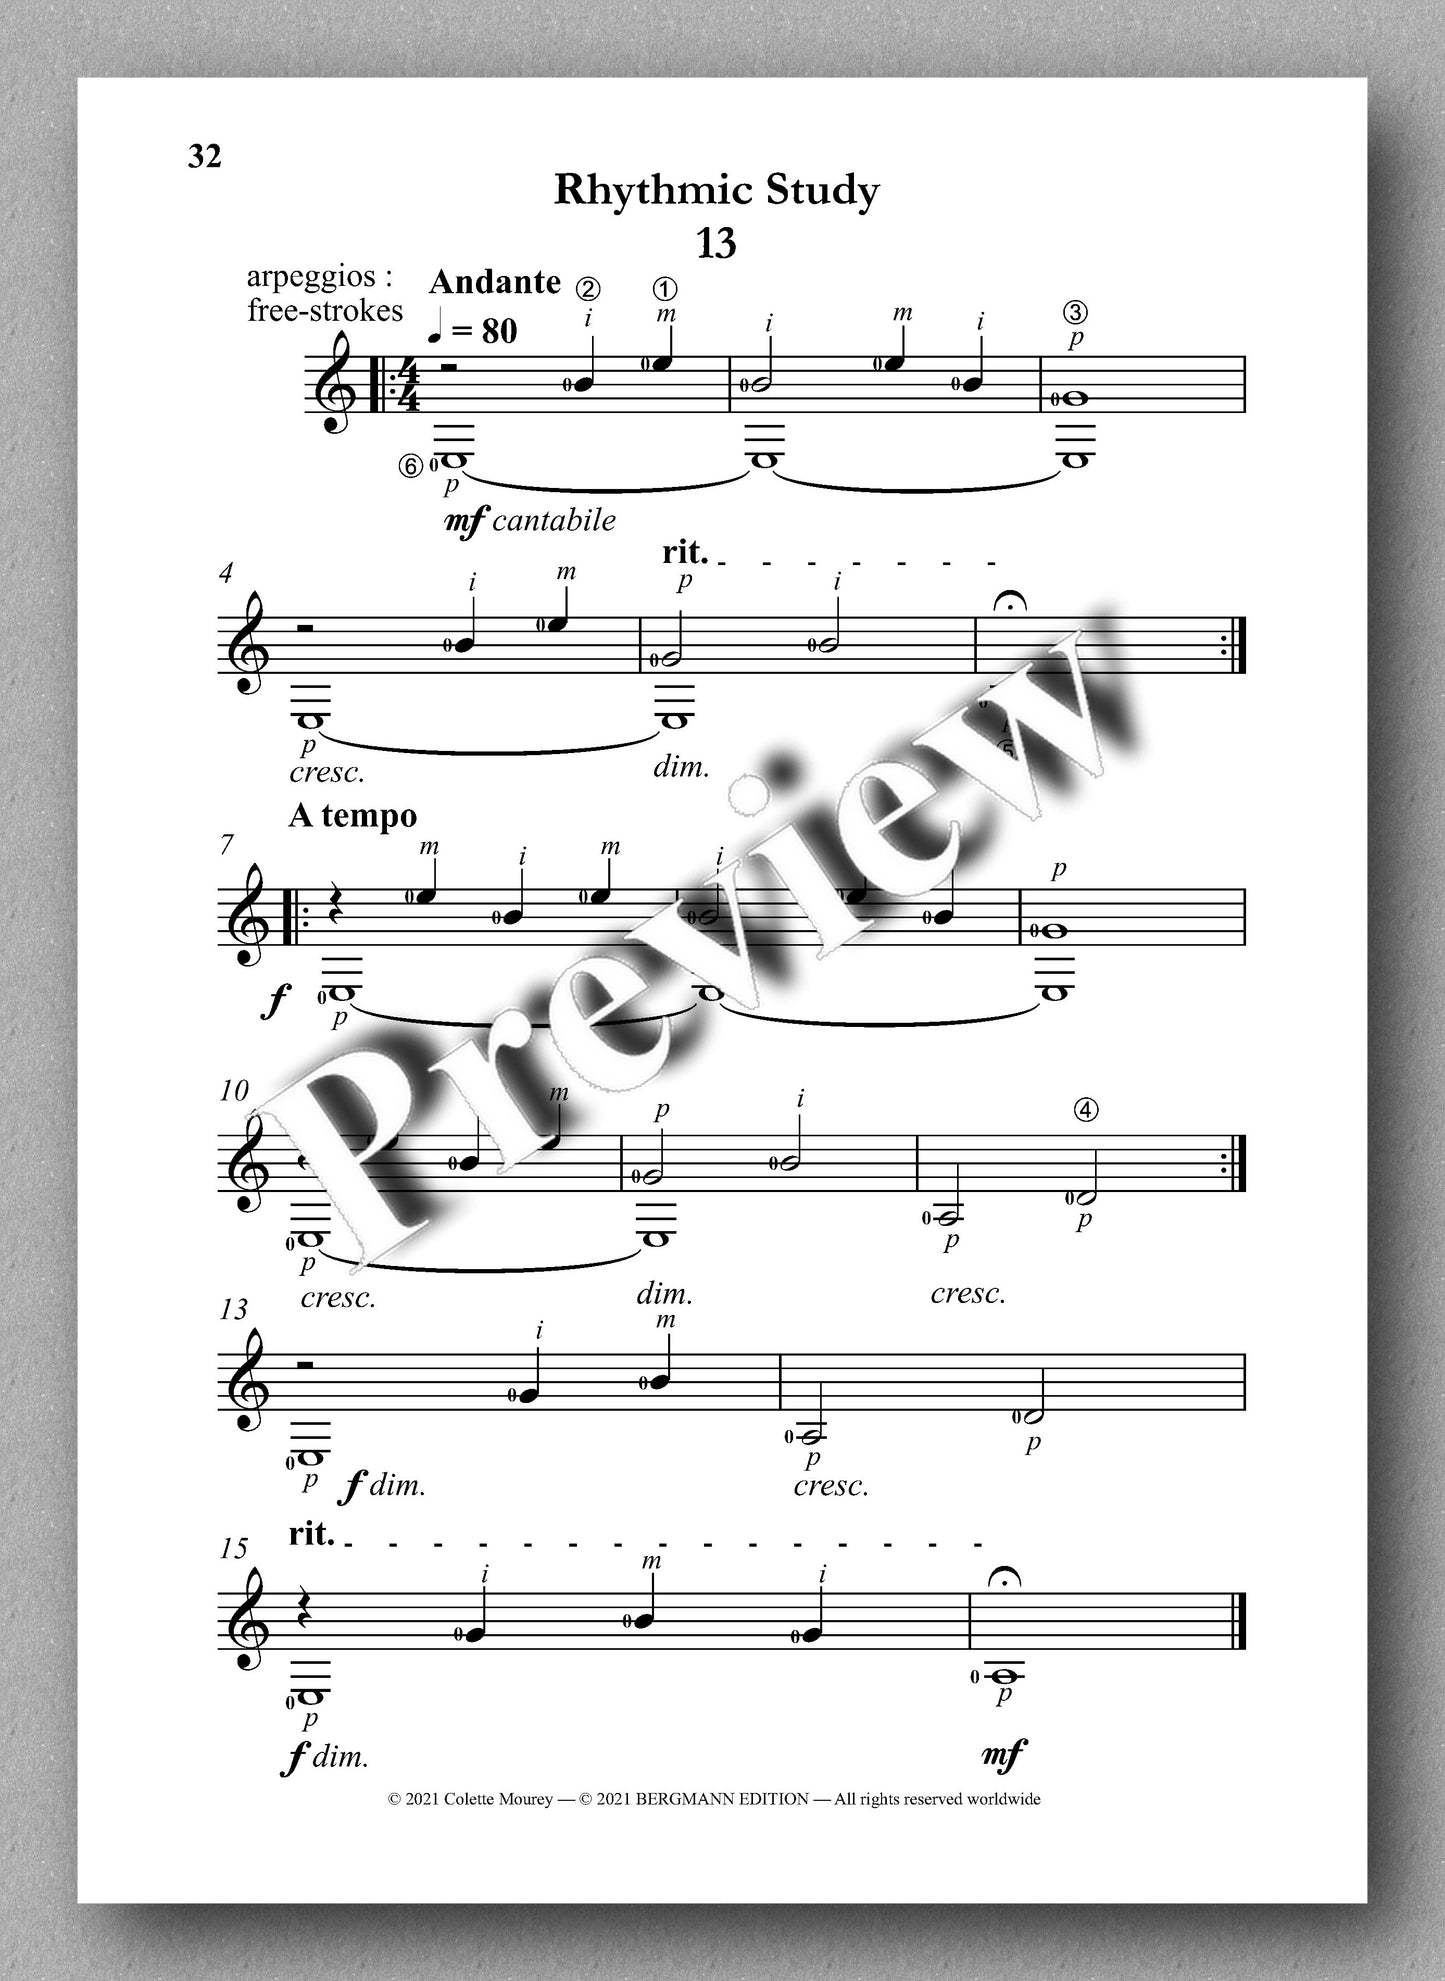 Mourey, Step by Step - music score 2